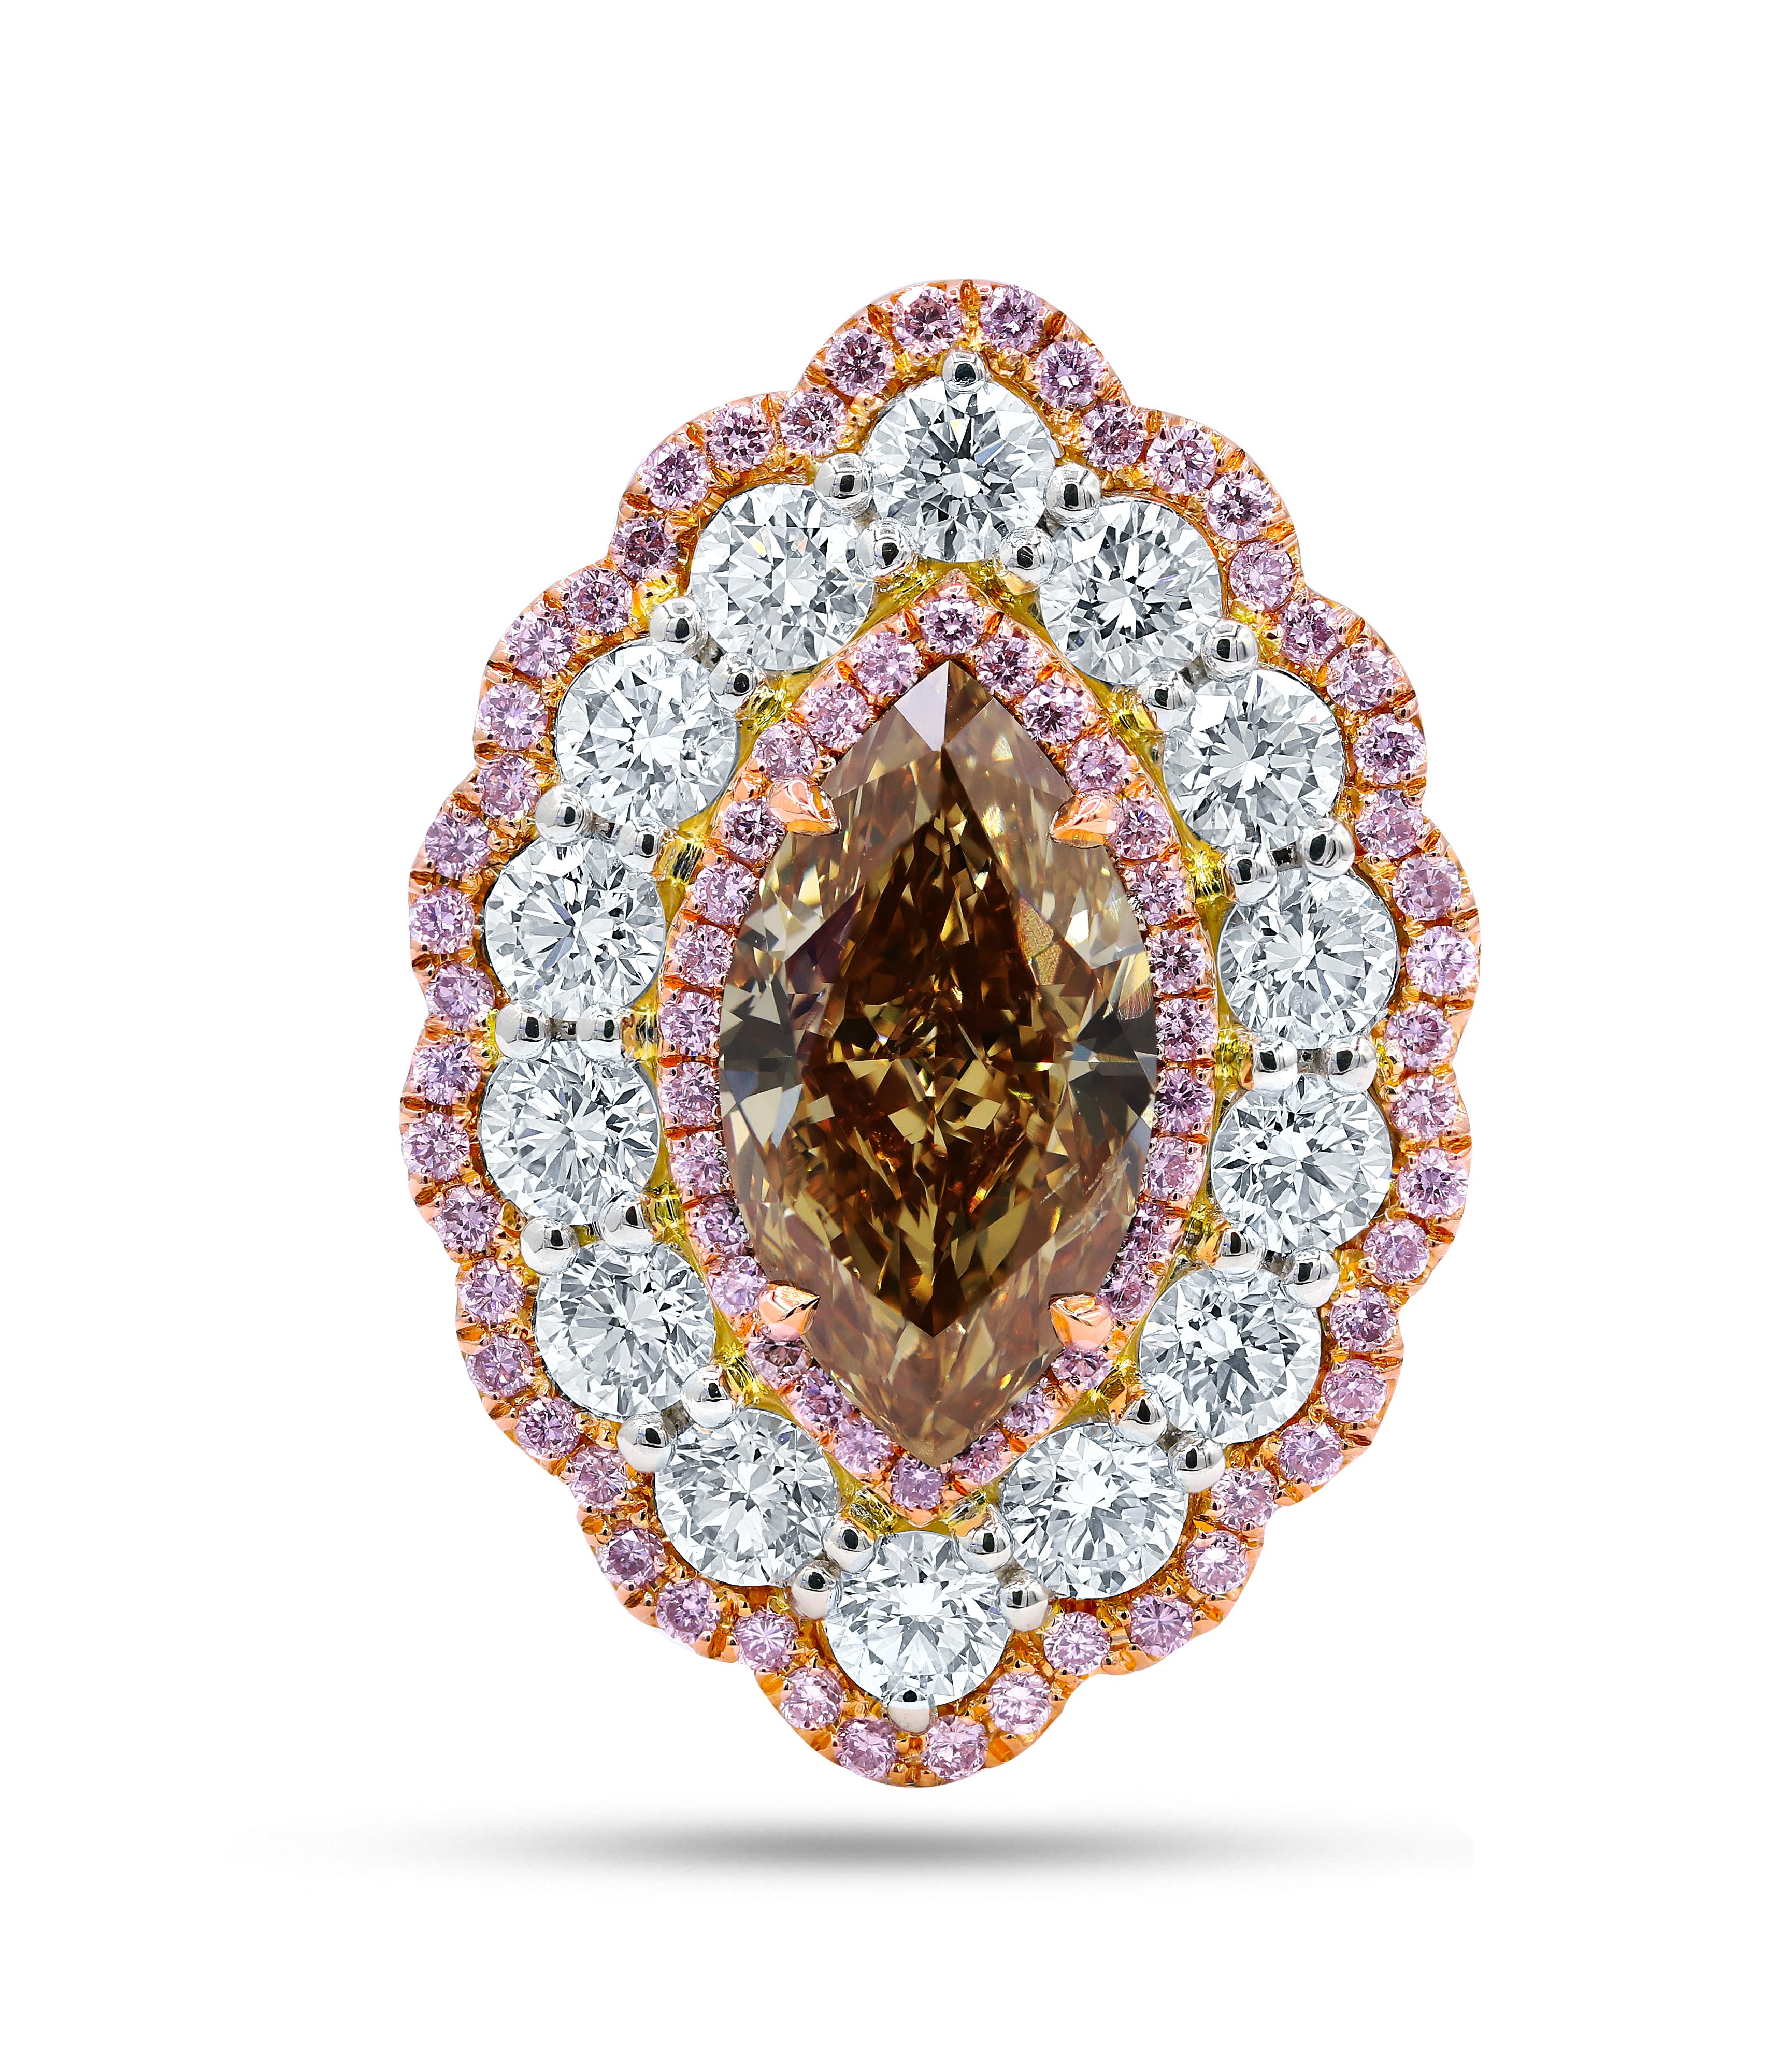 Platinum and 18kt rose gold fancy diamond ring with center fancy brown 5.03ct  marquee shape set in a halo from pink diamonds in micro pave diamond setting with 4.86cts of white big diamonds.
